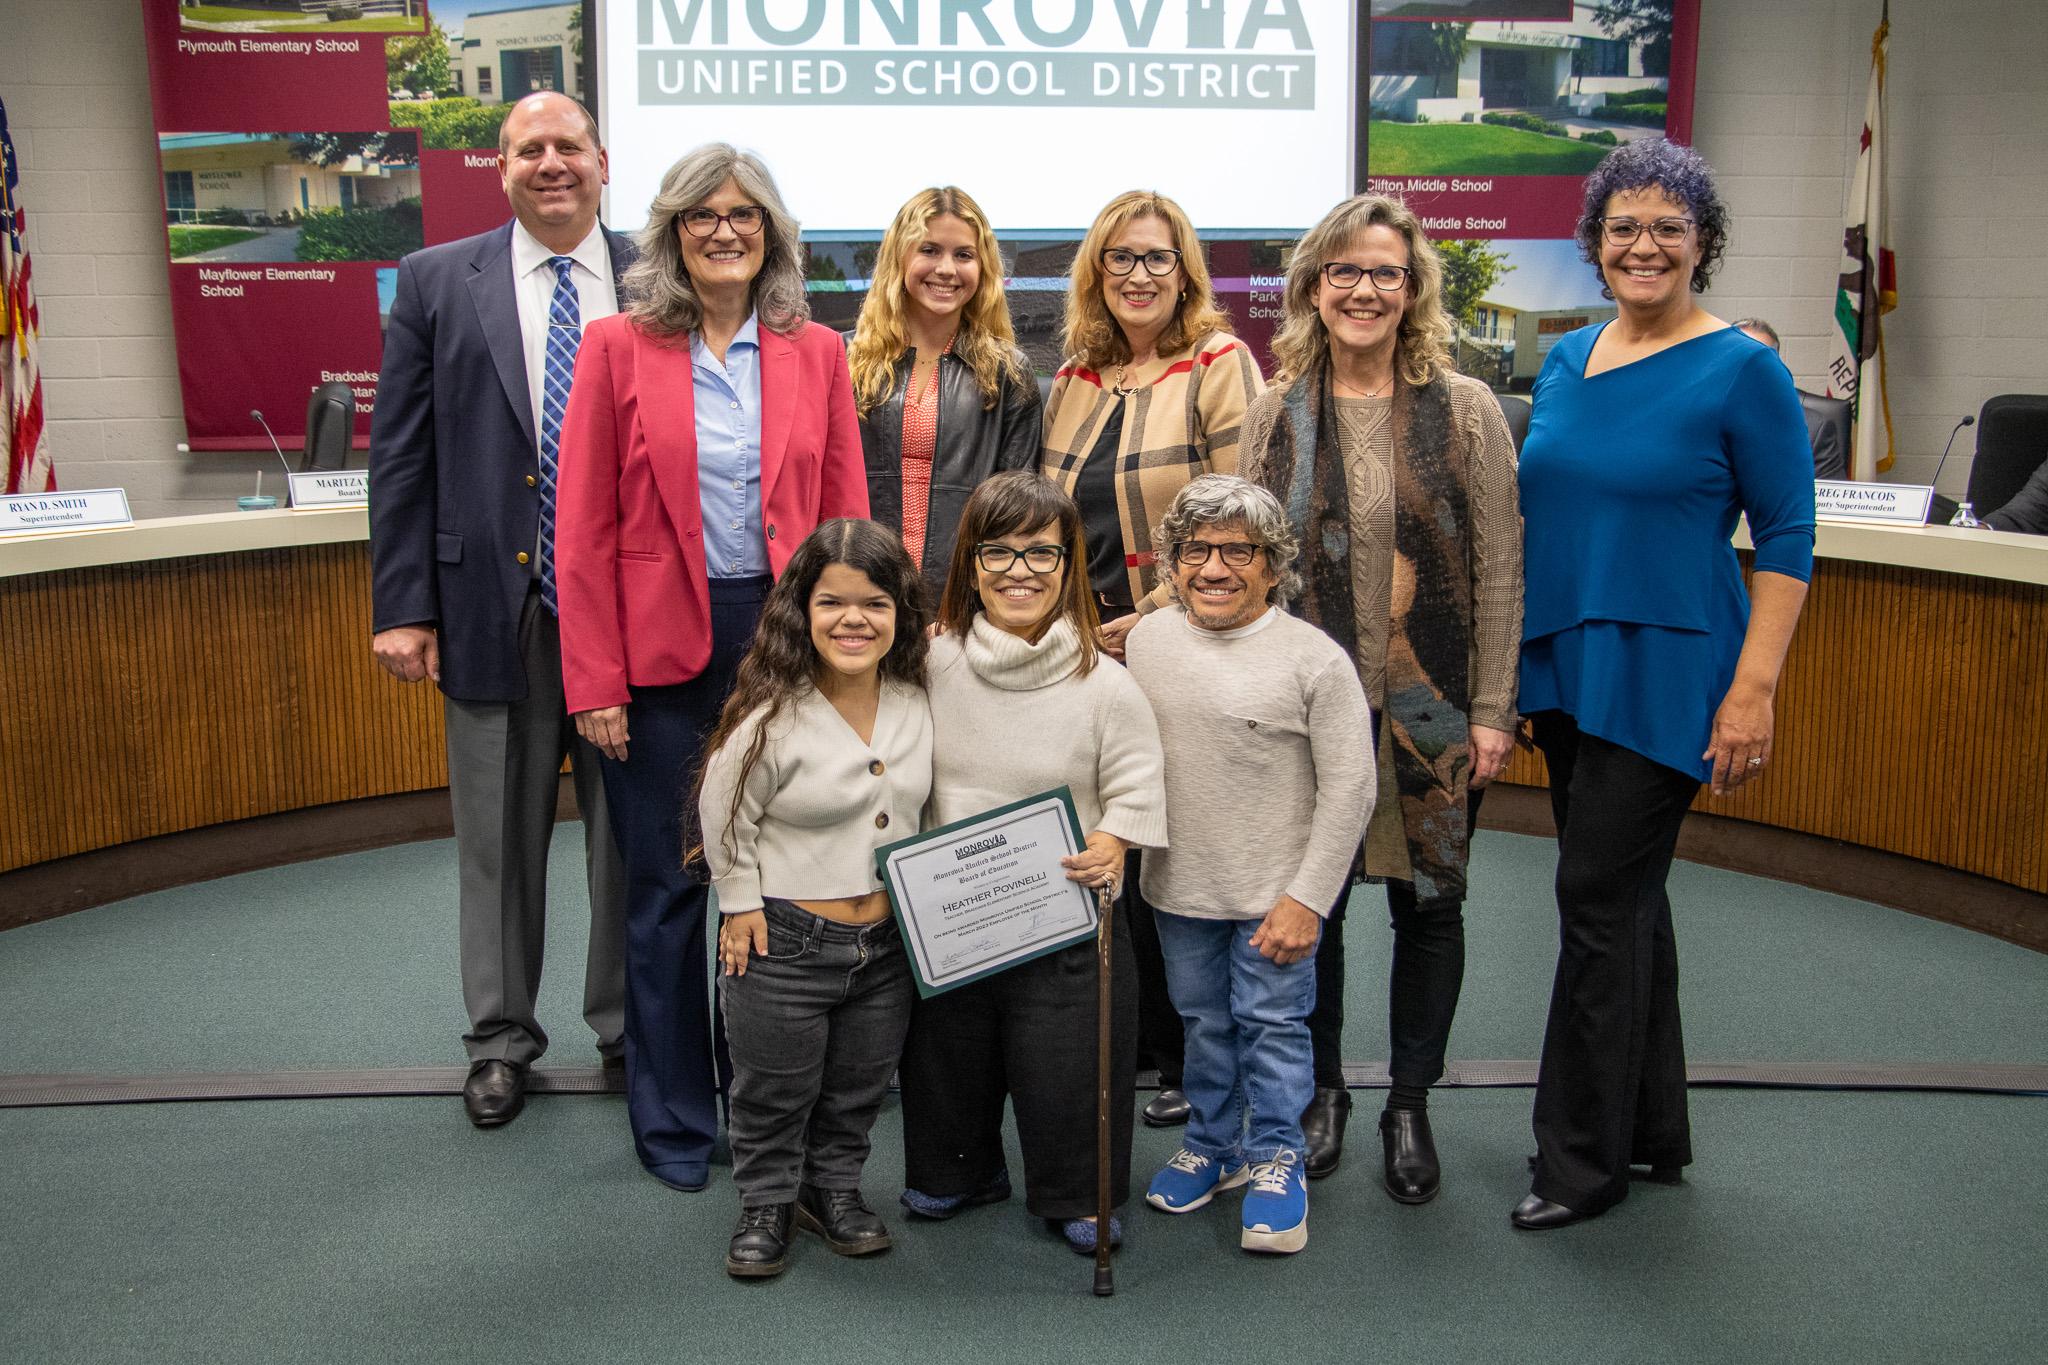 The Board of Education & the Monrovia Chamber of Commerce congratulated the following employees on being recipients of Monrovia Unified School District's "Employees of the Month" for March: Robert Crowder, Heather Povinelli, Thomas Bogdon, and Geovanna Loeza.